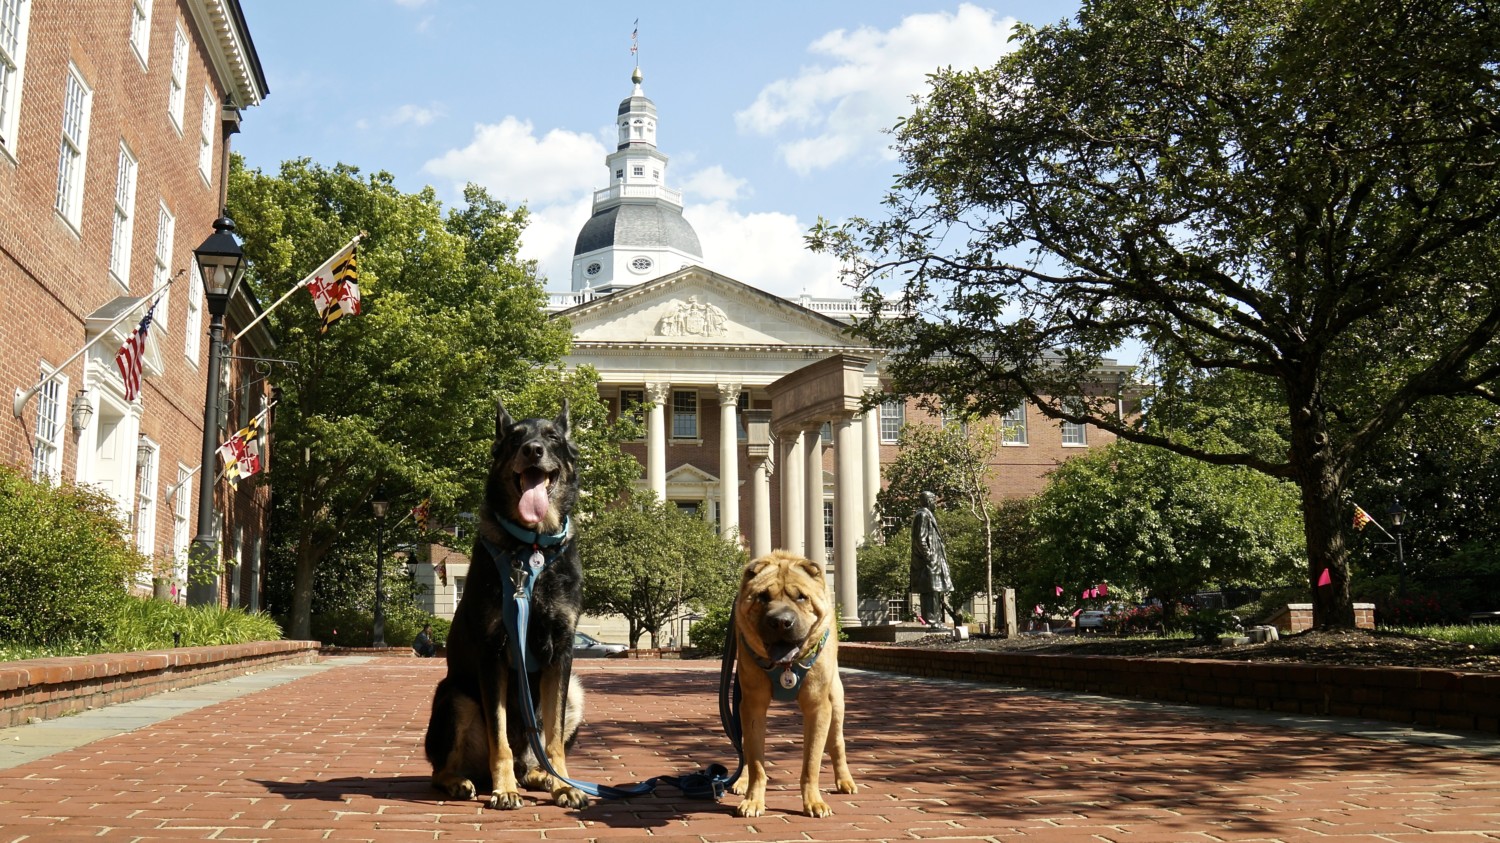 Things to Consider When Visiting Annapolis With Dogs